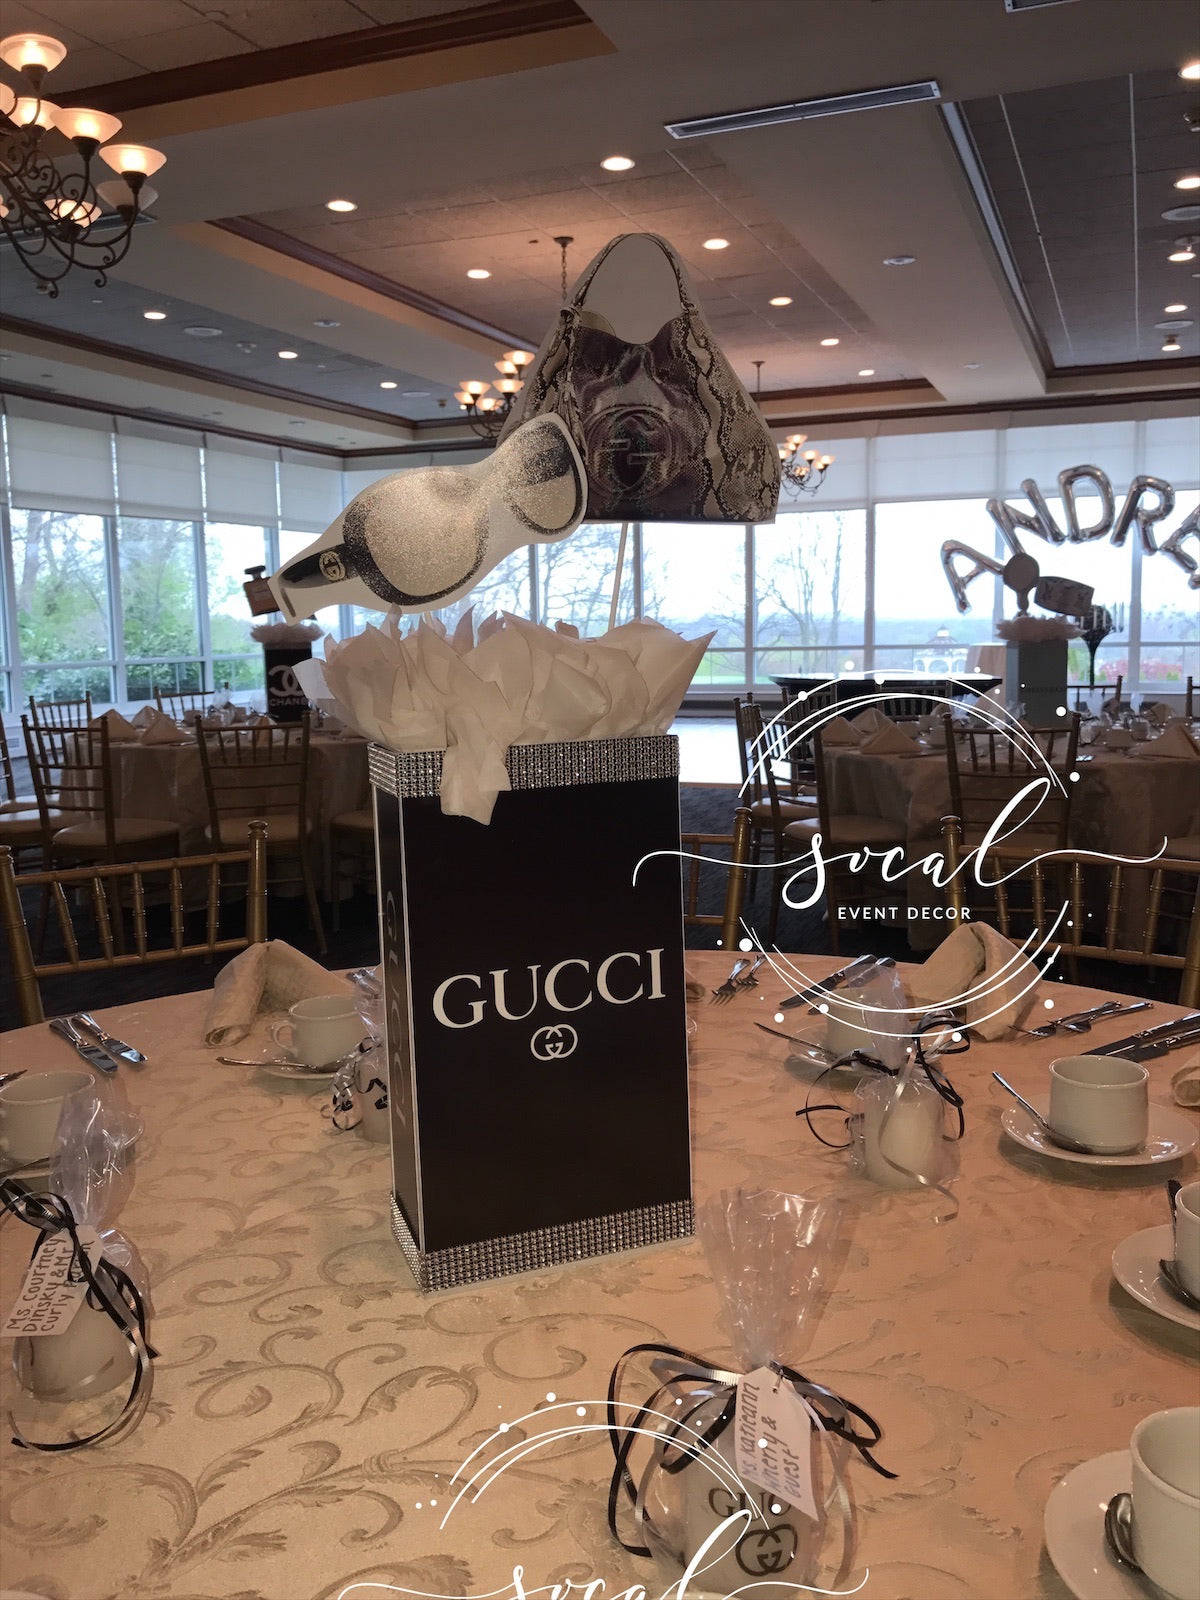 Shopping and Fashion Themed Centerpieces for Sweet 16, 21st, 30th